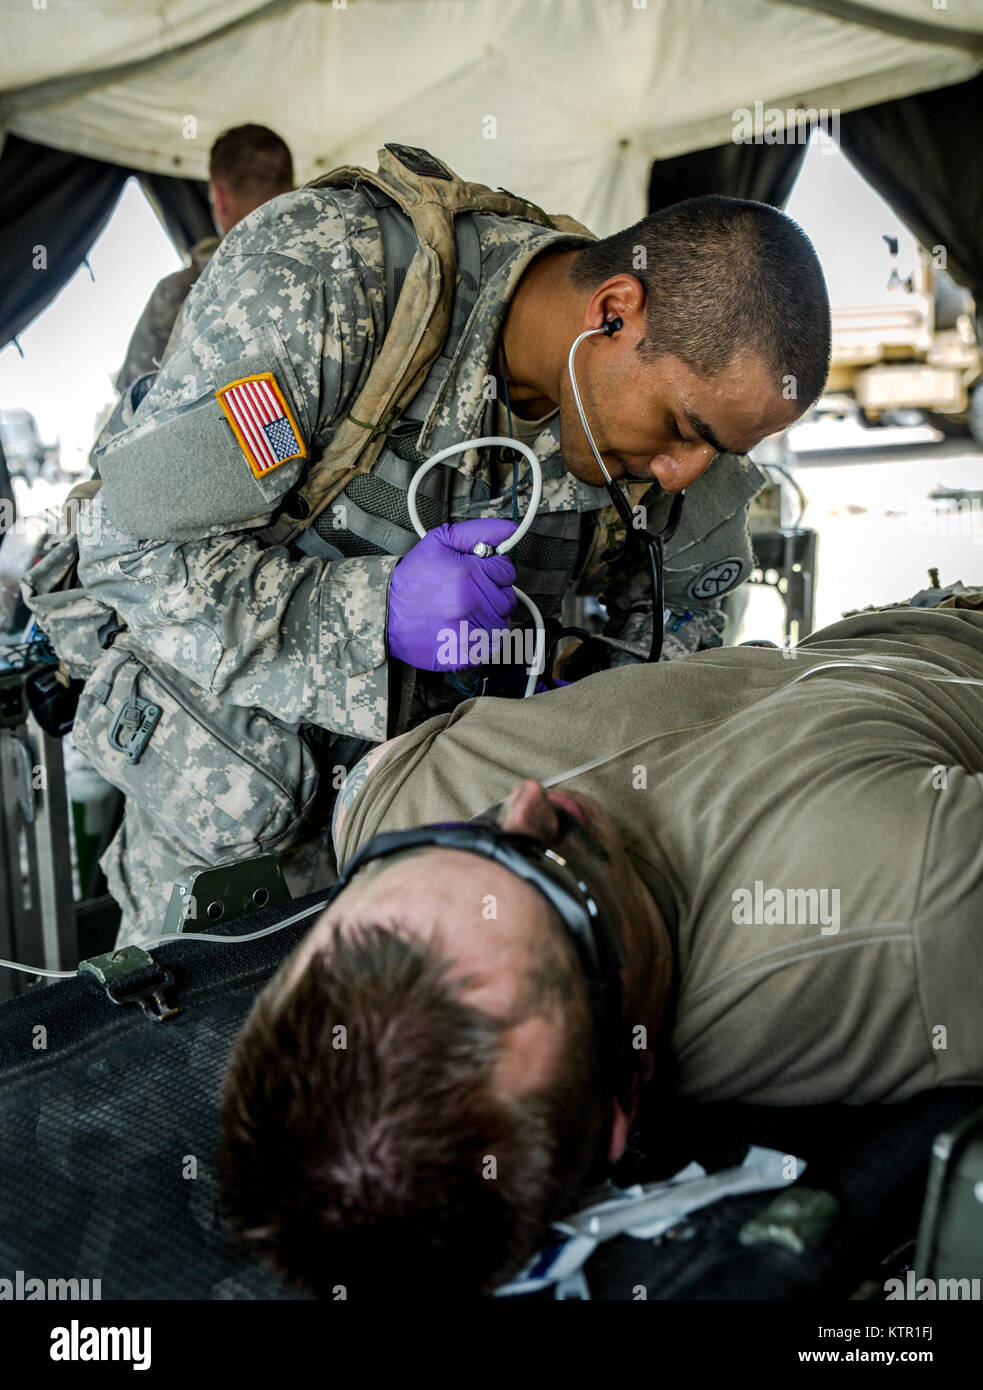 New York Army National Guard Spc. Muhammad Alam, assigned to Headquarters Co., 1st Battalion, 69th Infantry, checks a Soldier's blood pressure during a mass casualty exercise at the Army’s Joint Readiness Training Center, Fort Polk, La., Saturday, July 16, 2016. More than 3,000 New York Army National Guard Soldiers deployed for a three week exercise at the Army’s Joint Readiness Training Center, July 9-30, 2016. U.S. Army National Guard photo by Sgt. Harley Jelis. Stock Photo